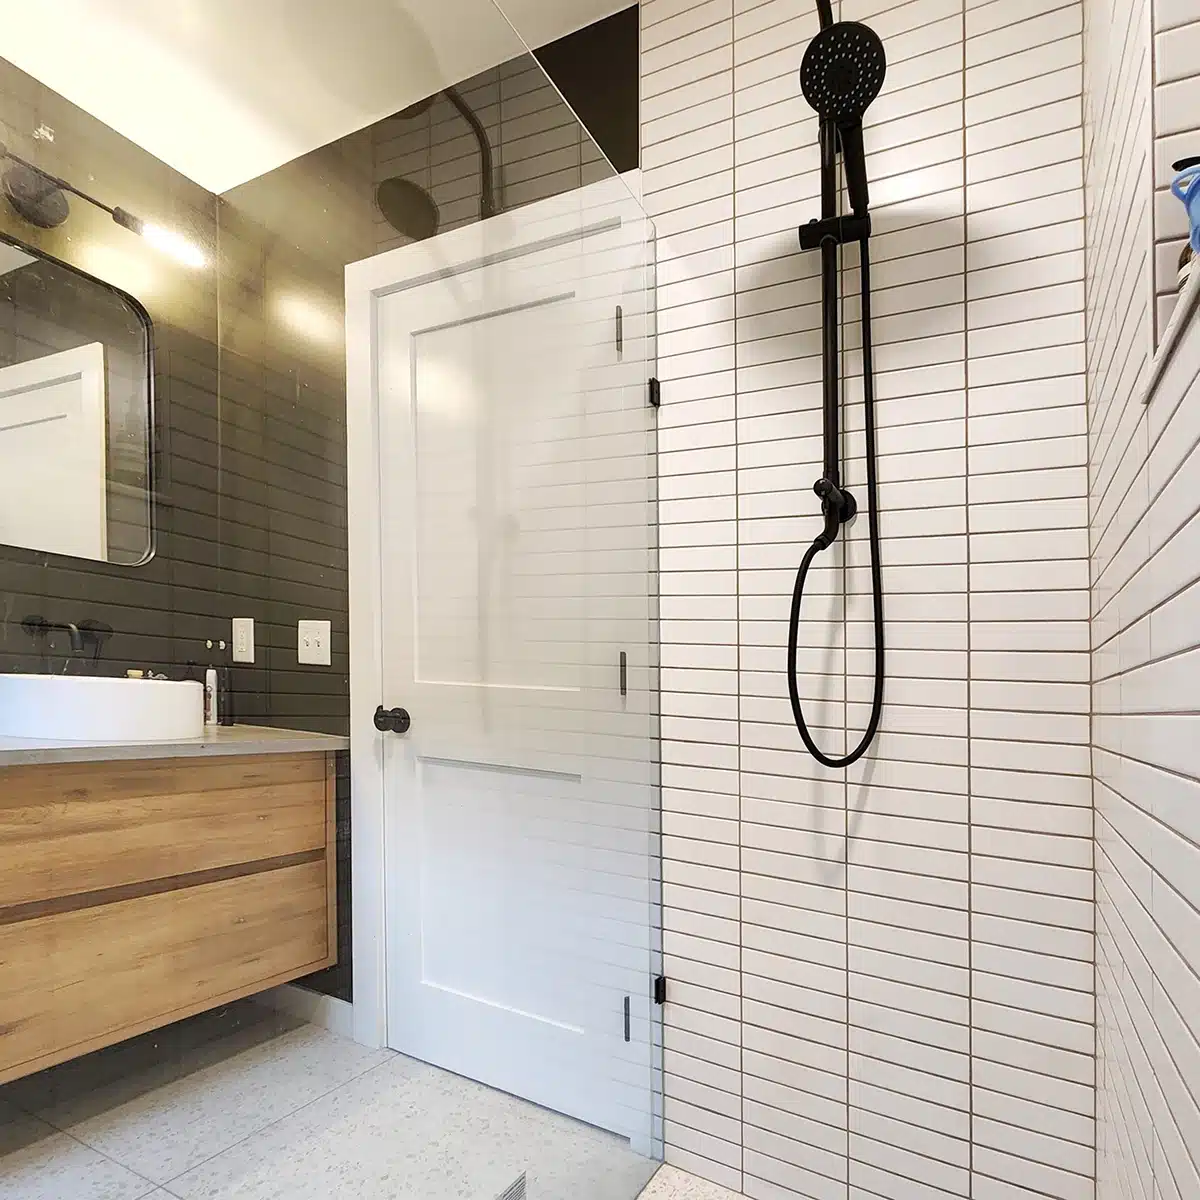 Modern bathroom shower with sleek black showerhead and white subway tile, complemented by a wooden vanity.